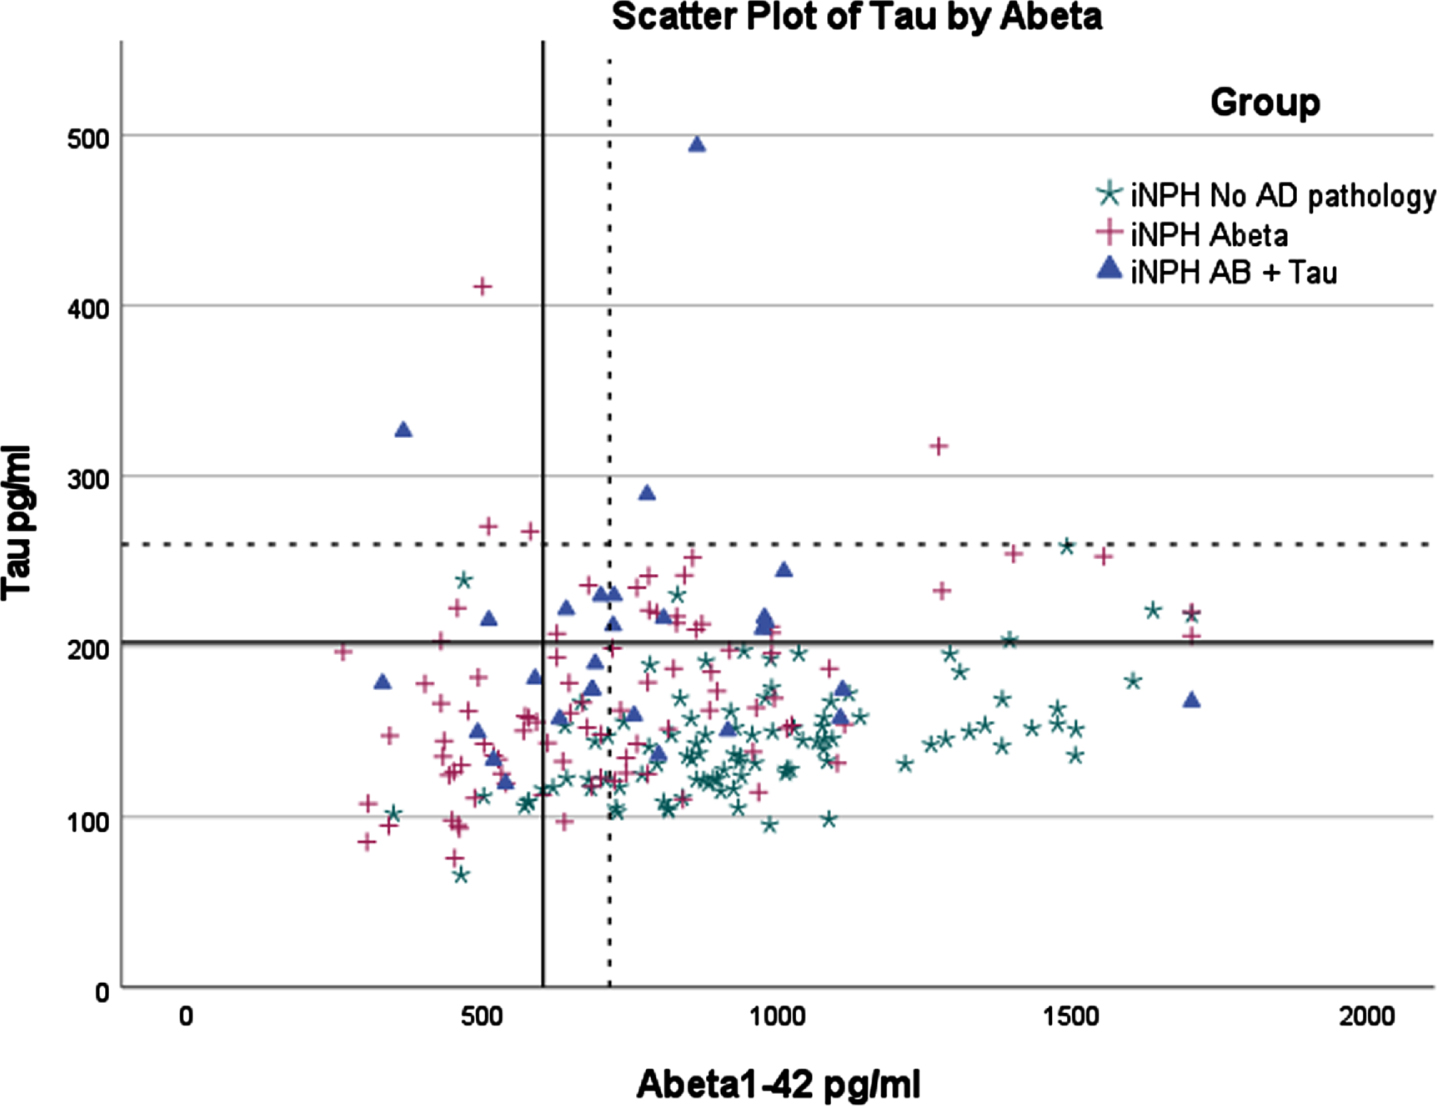 Scatterplot of t-Tau and Aβ1 - 42 with upper left quadrant indicating pathological values. t-Tau, t-Tau from lumbar sample; Abeta1-42, Aβ1 - 42 from lumbar sample. Axis values are in pg/ml. Continuous line indicates cutoff values with correction factor. Dotted line indicates cutoff values for general population.